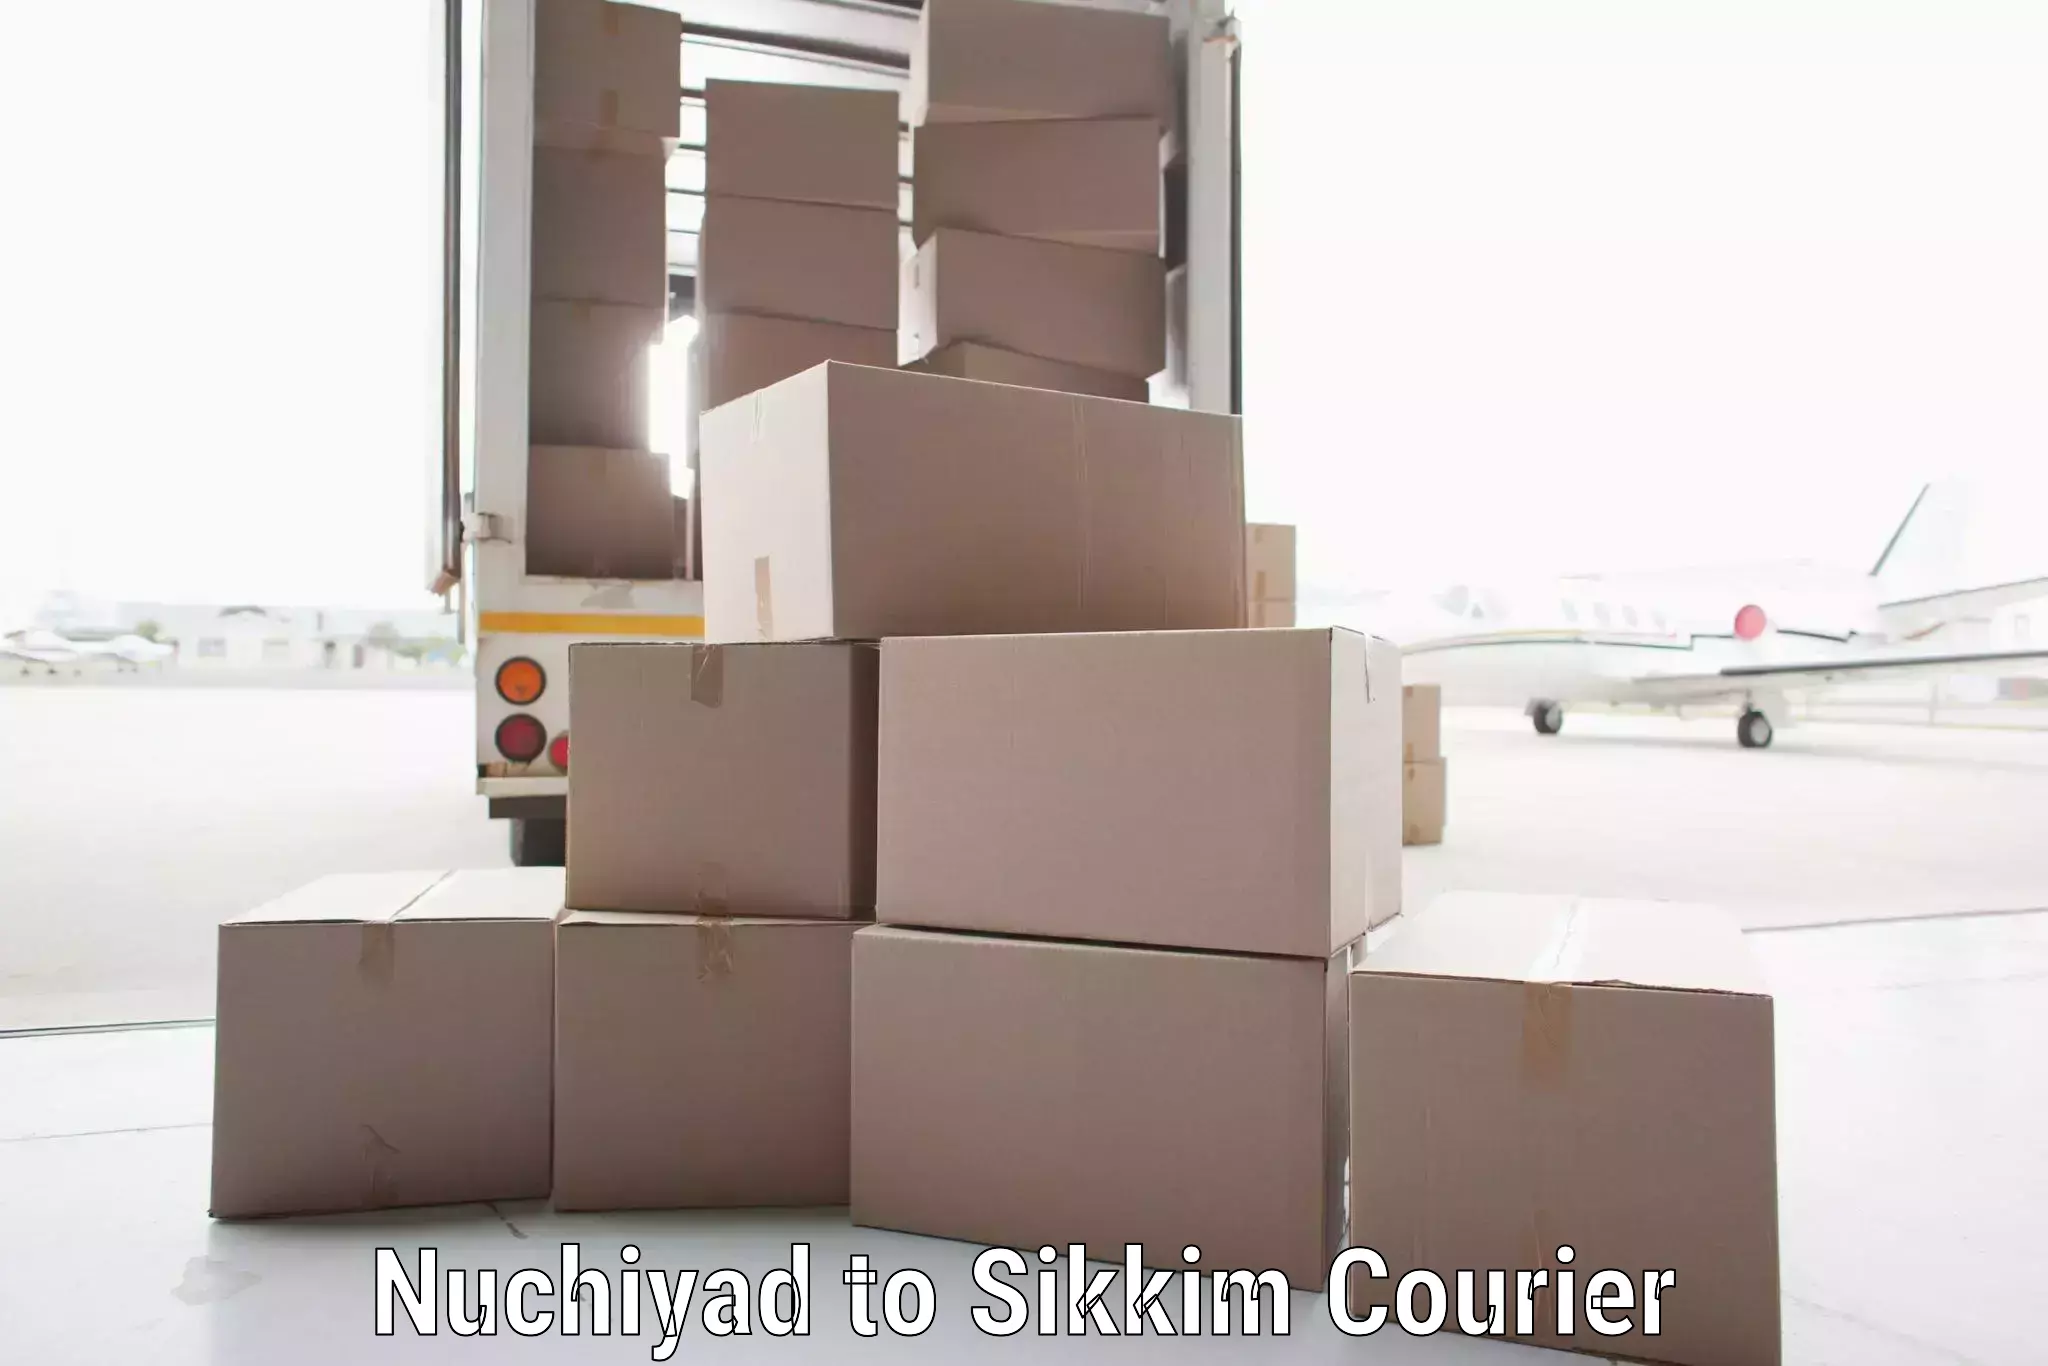 Automated shipping processes in Nuchiyad to Sikkim